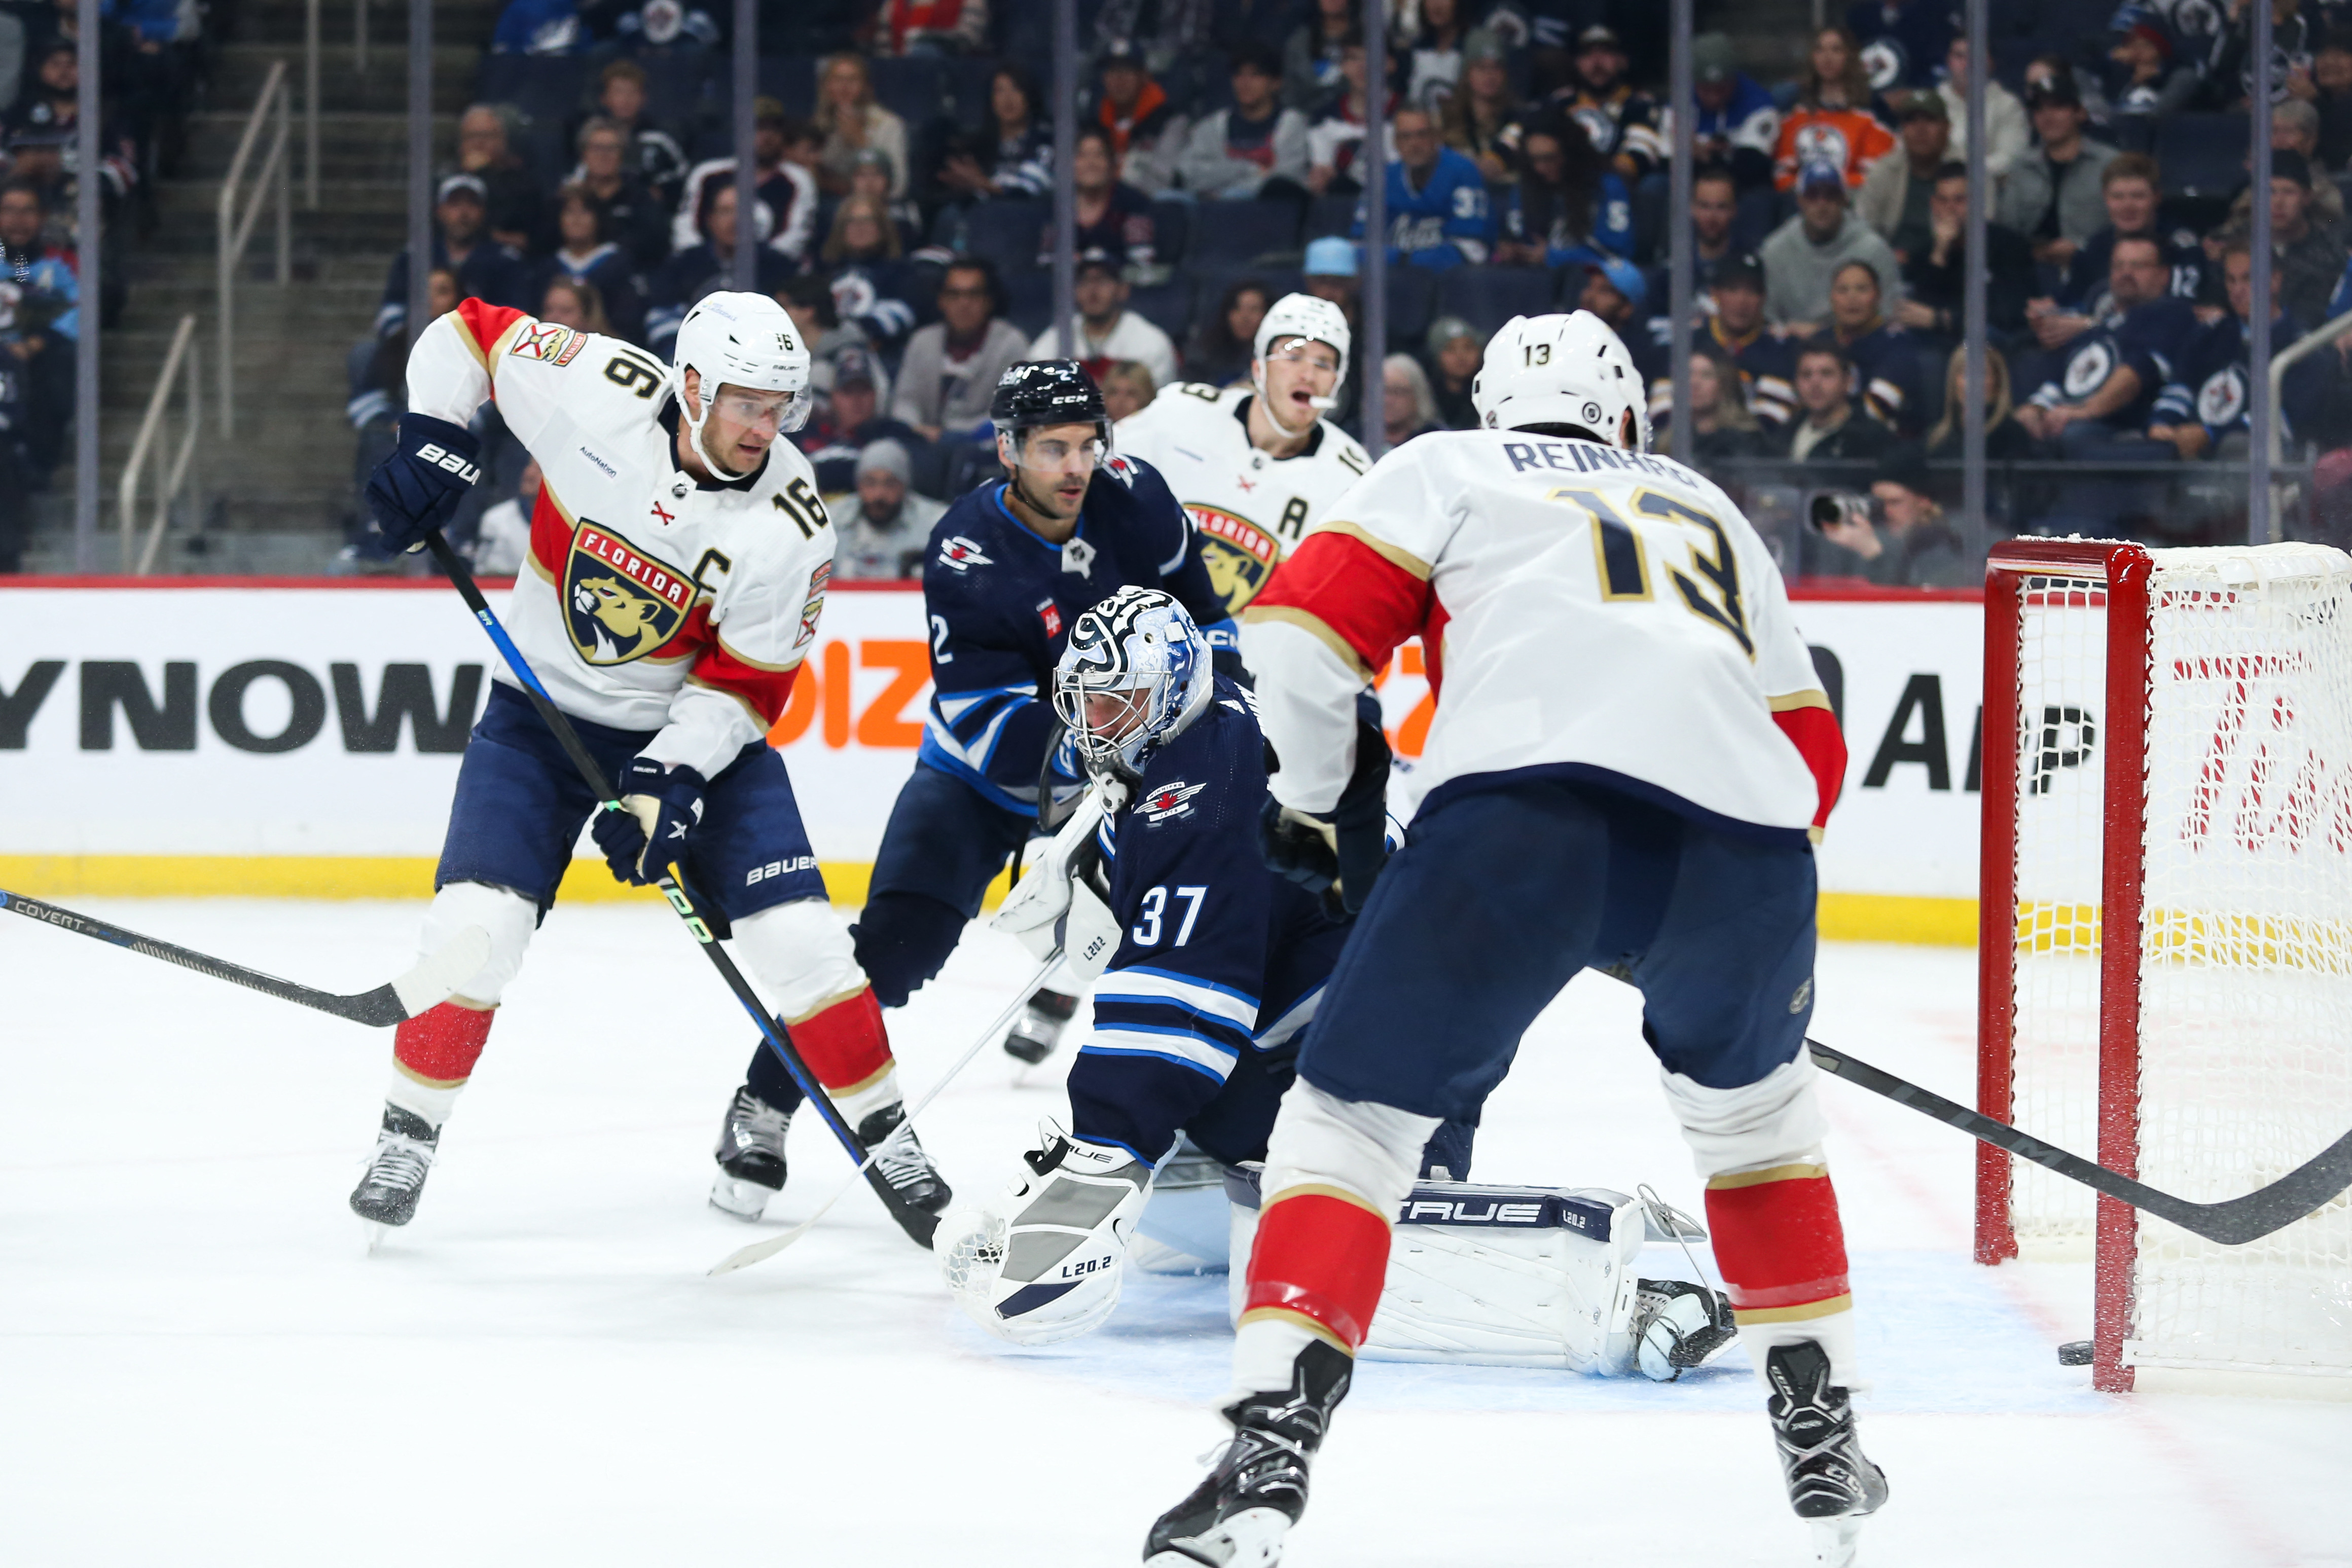 Kyle Connor leads the Winnipeg Jets past the Florida Panthers 6-4